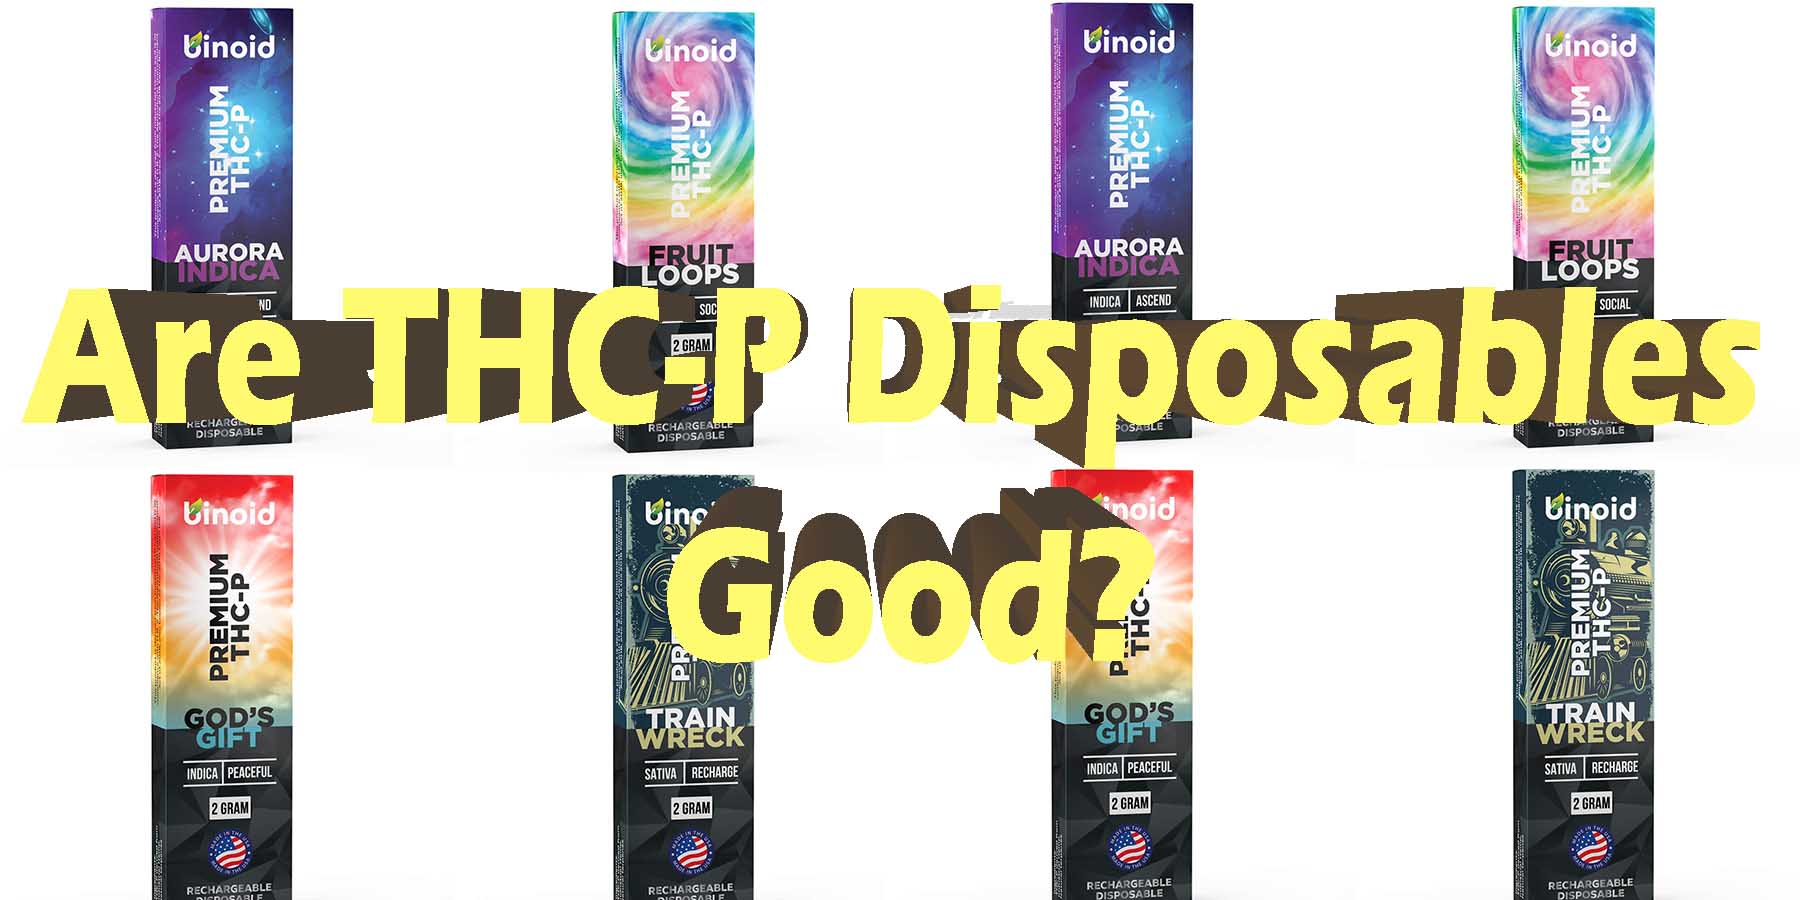 Are THCP Disposables Good WhereToGet HowToGetNearMe BestPlace LowestPrice Coupon Discount For Smoking Best High Smoke Shop Online Near Me StrongestBrand BestBrand Binoid Bloomz